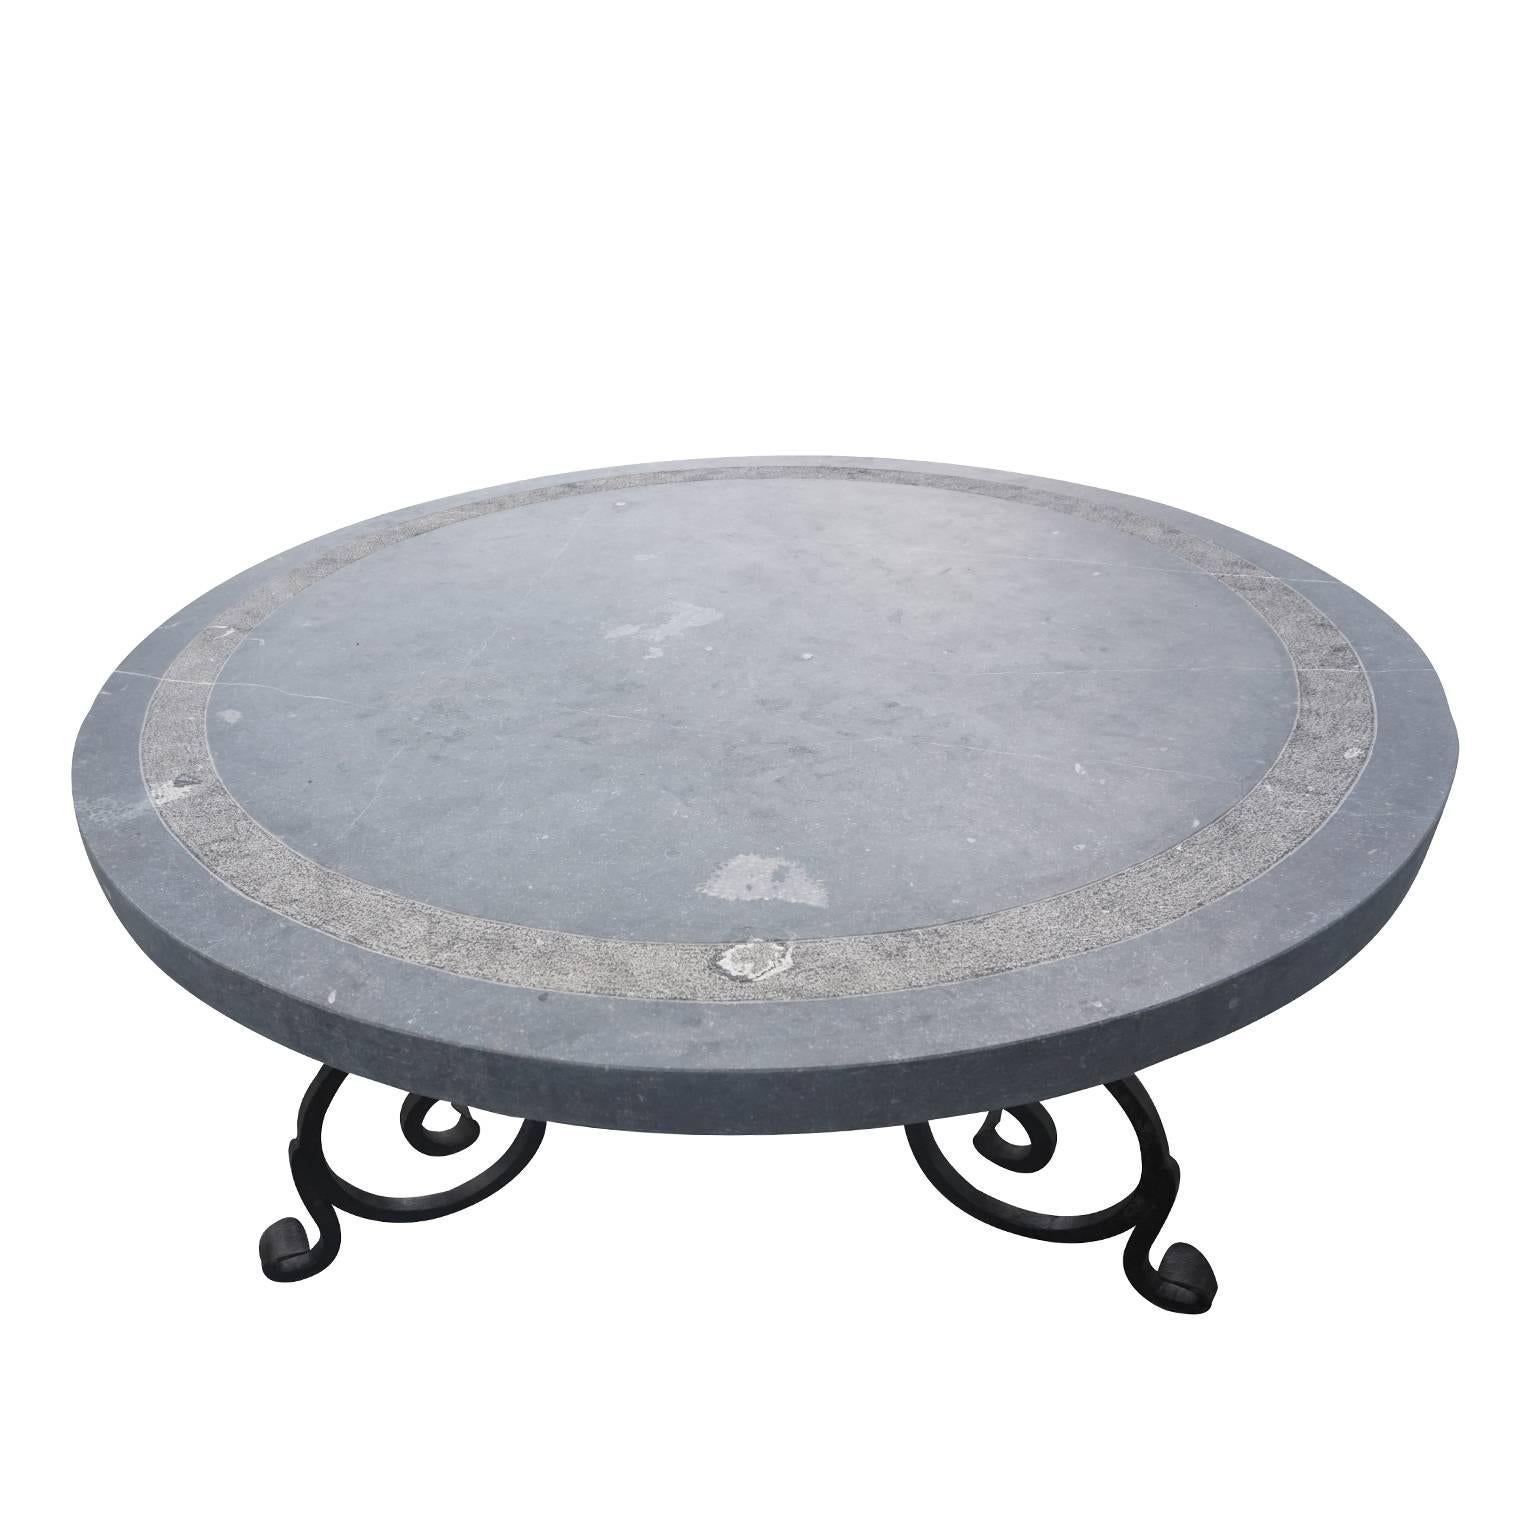 Large and impressive round Belgian blue stone top table with decorative chiselled rim on a honed surface. The heavy and impressive 19th Century base is made of hand-forged wrought iron with scroll deco in the 18th Century manner. 

Belgian bluestone